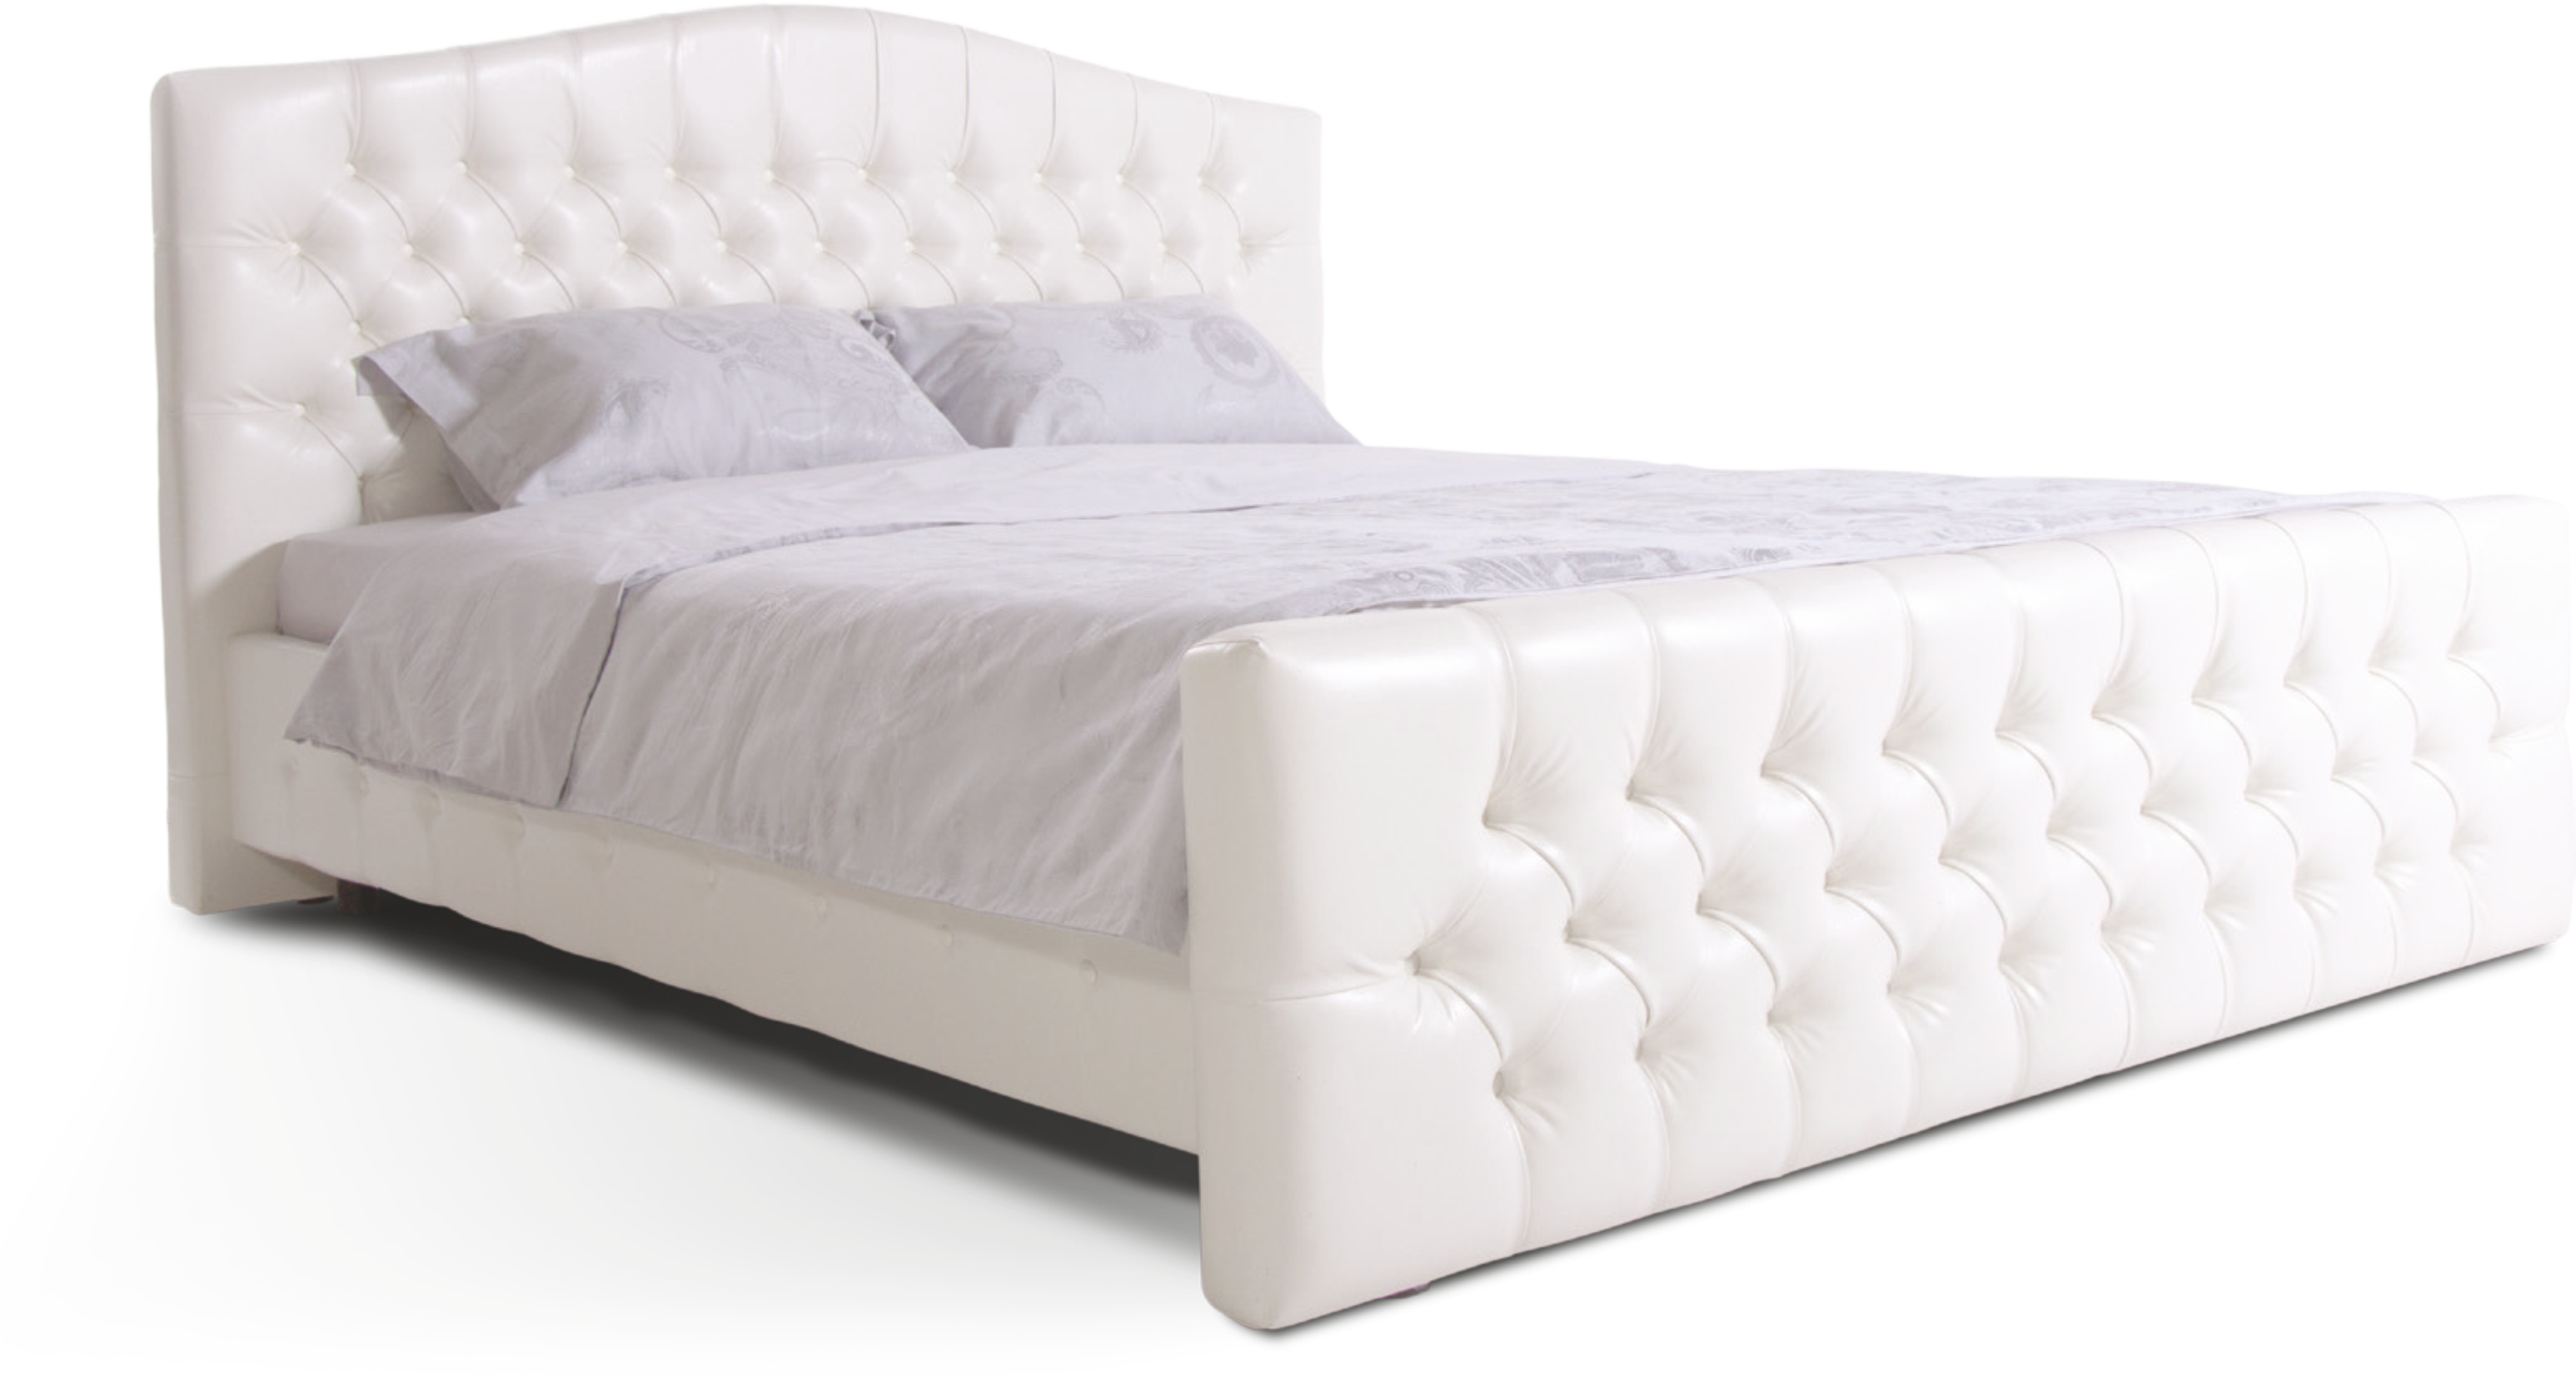 Bed PNG images Download 